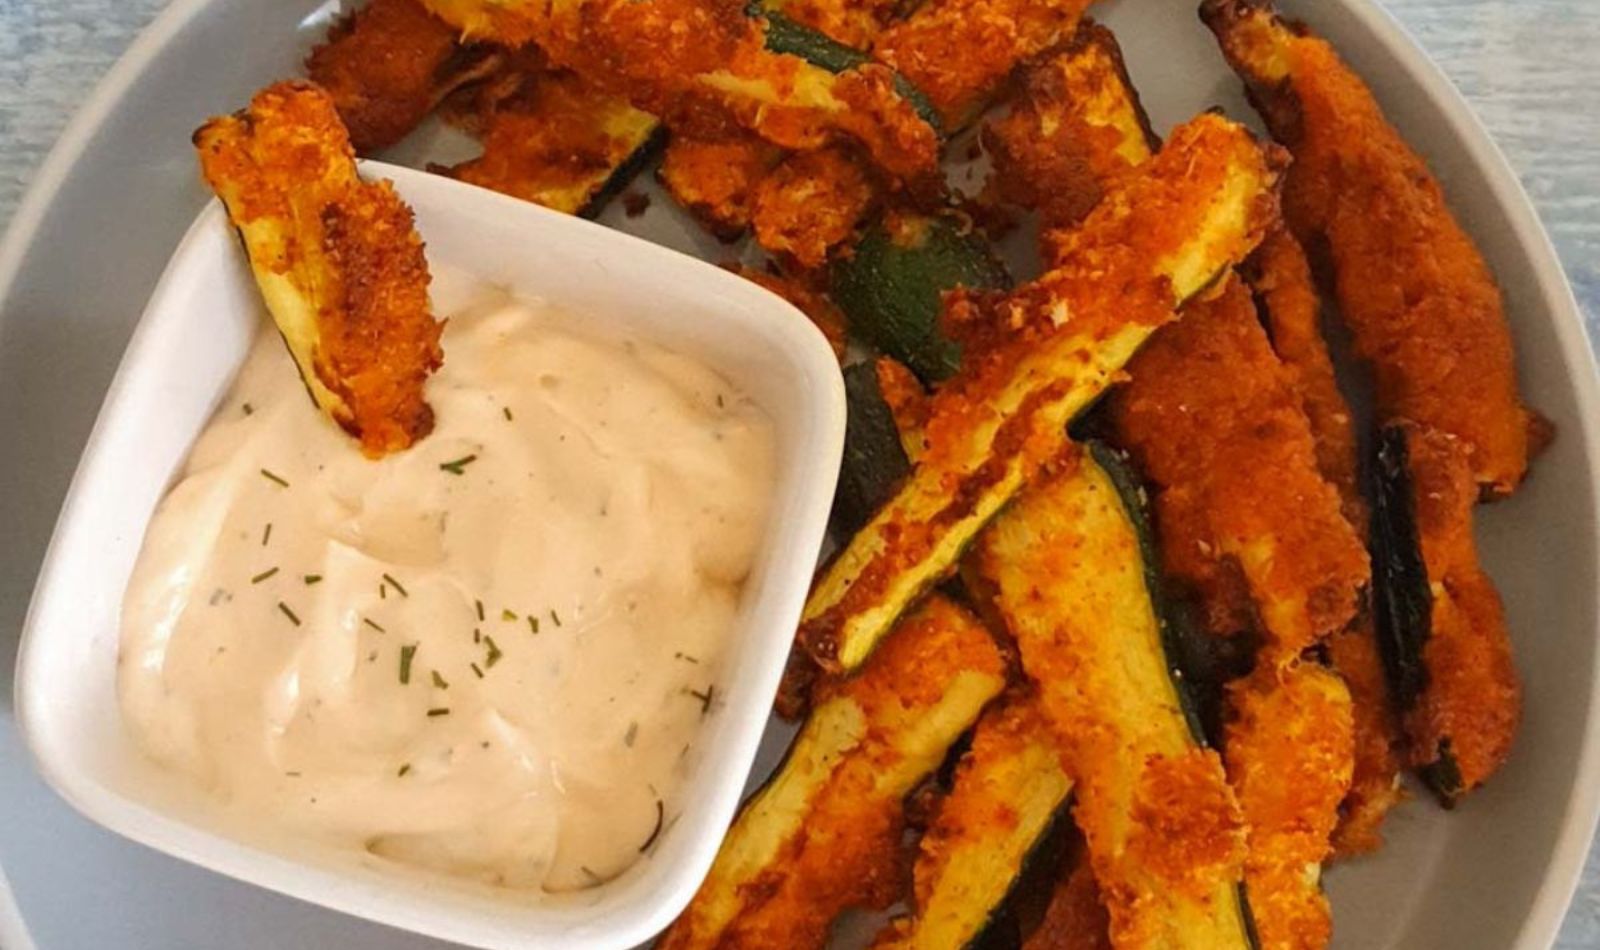 Image of crispy air fryer zucchini fries with a white bowl of creamy white dip on a white plate.